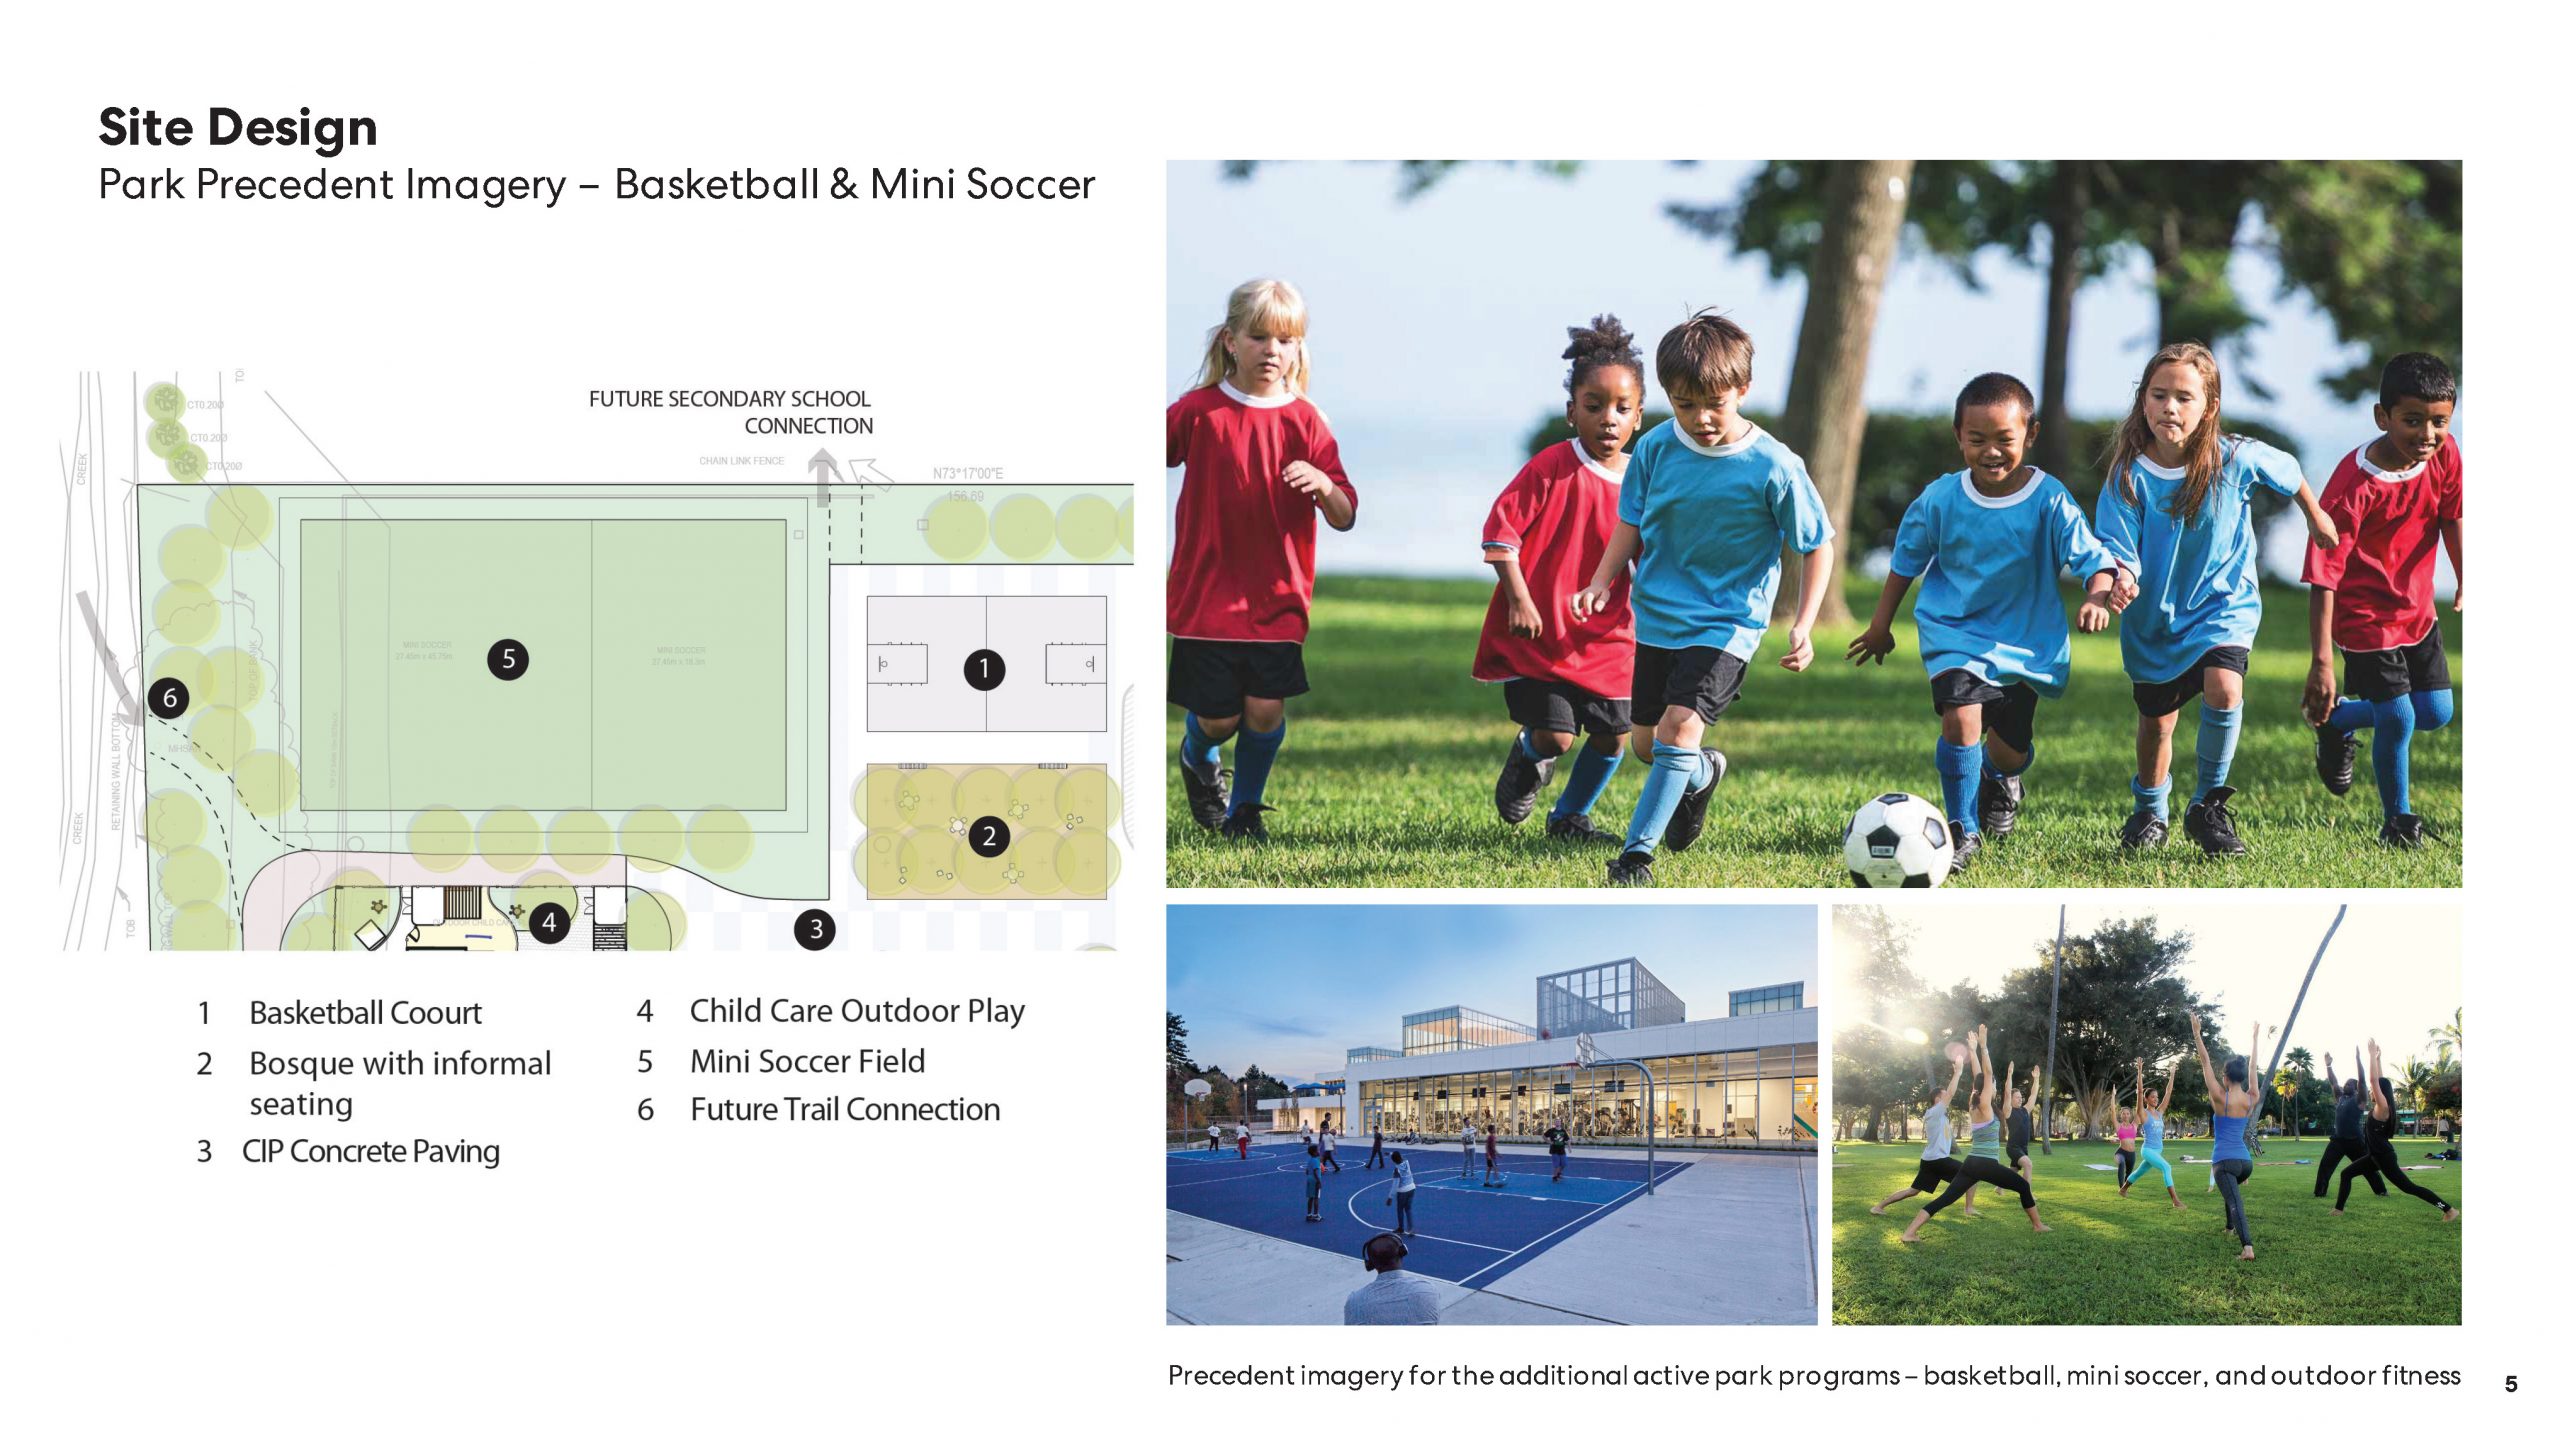 Precedent imagery for the additional active parks programs – basketball, mini soccer and outdoor fitness